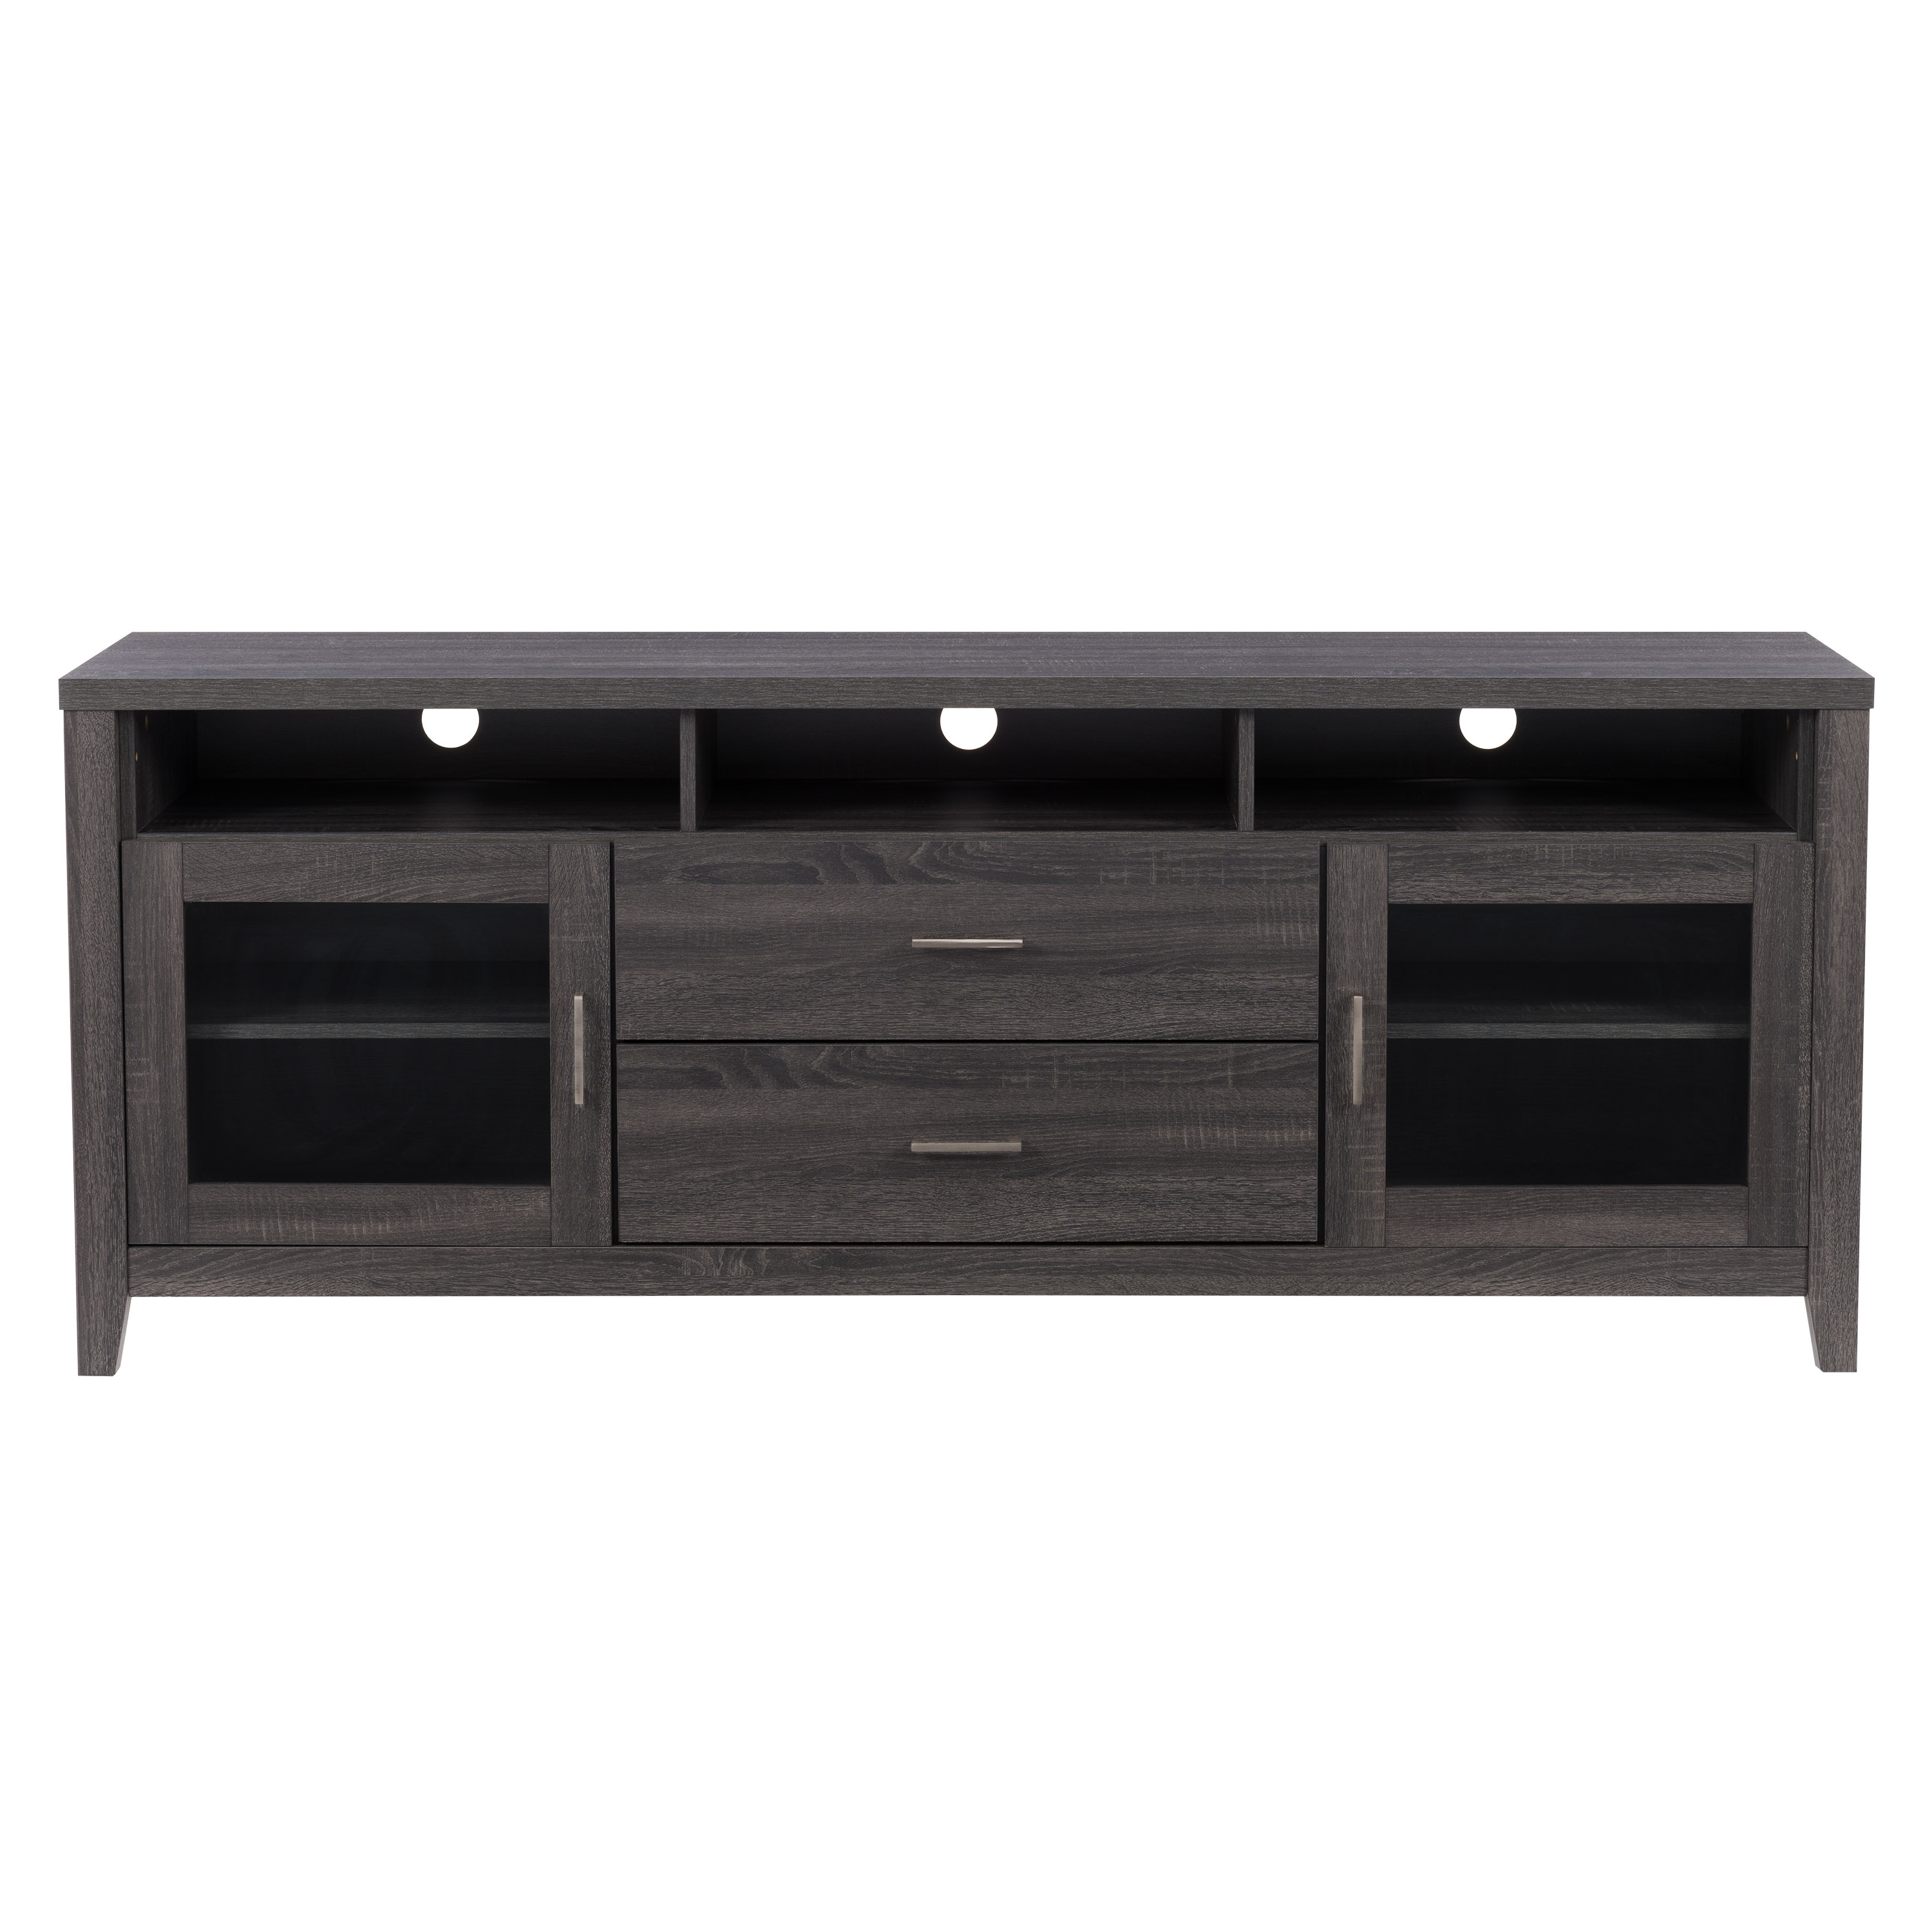 CorLiving Hollywood Dark Grey TV Cabinet with Drawers, for TVs up to 85"